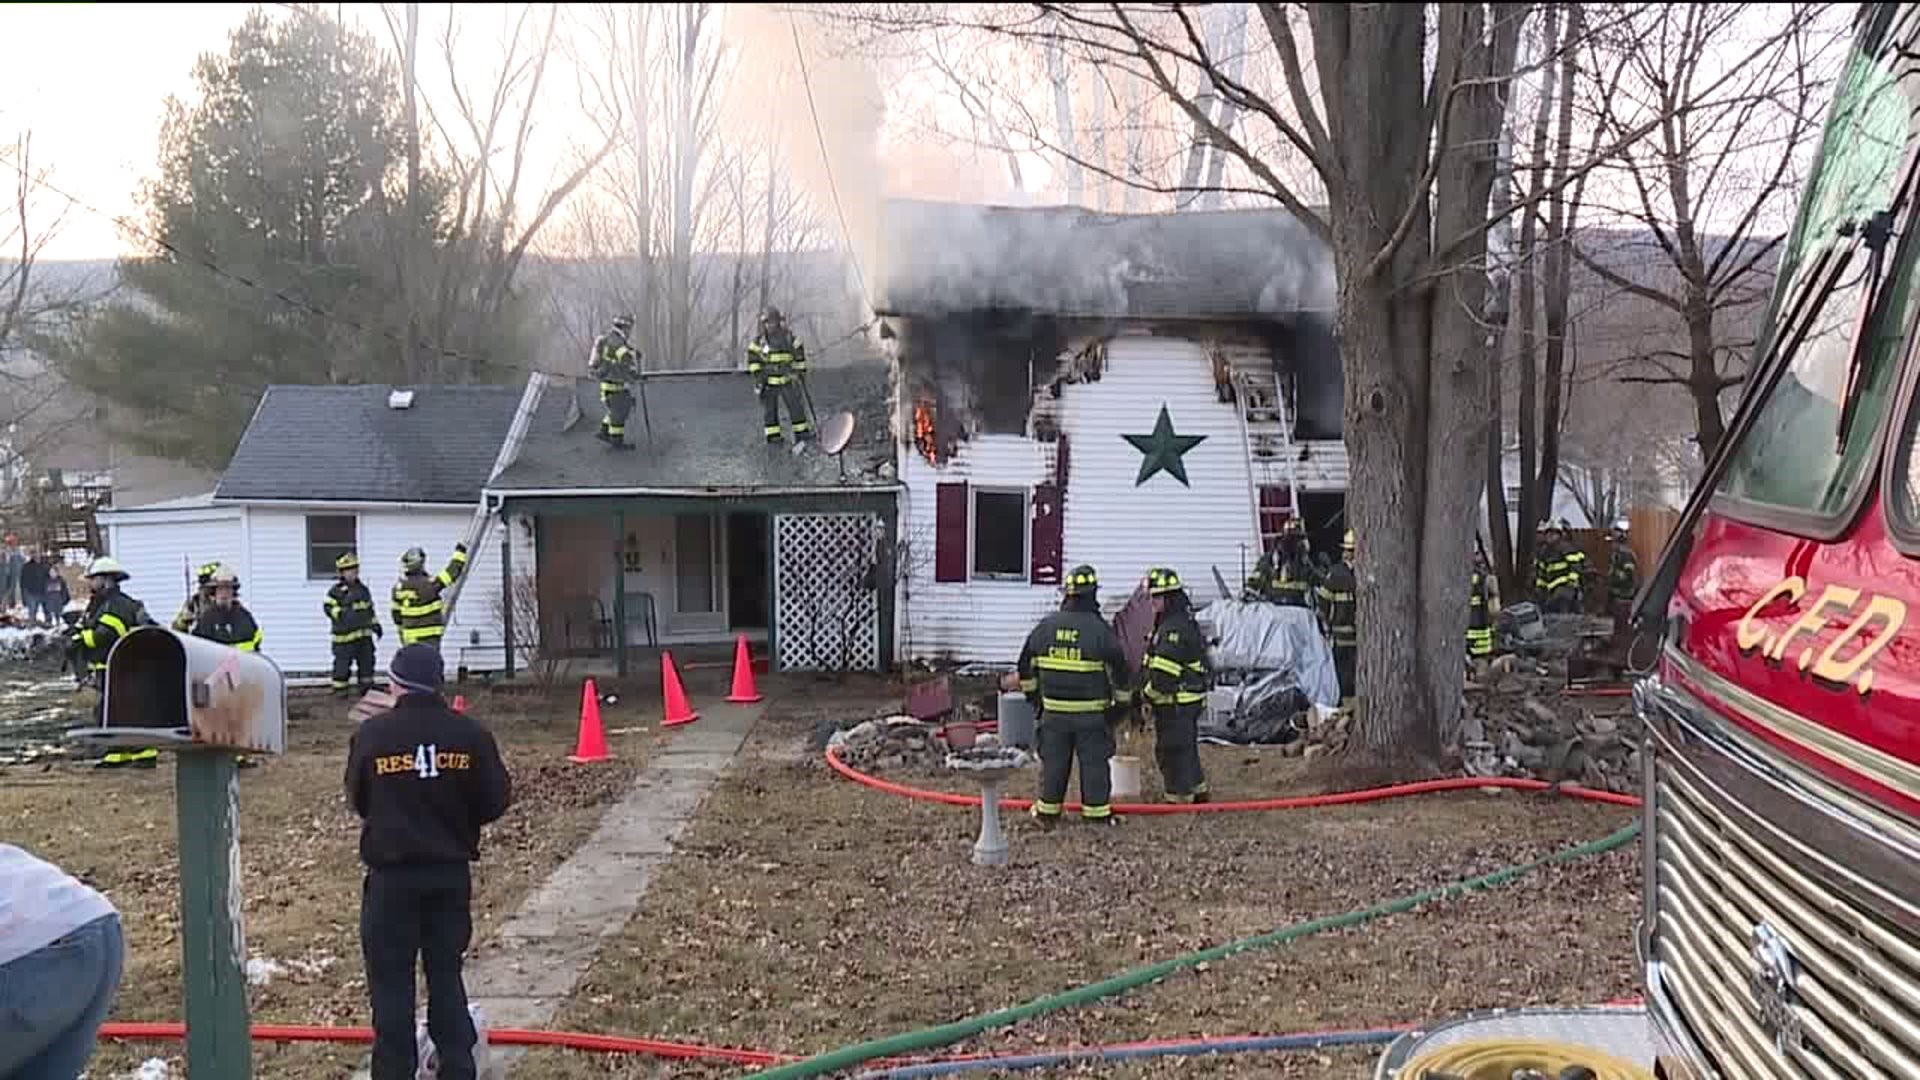 Family Looks to Move Forward After Fire